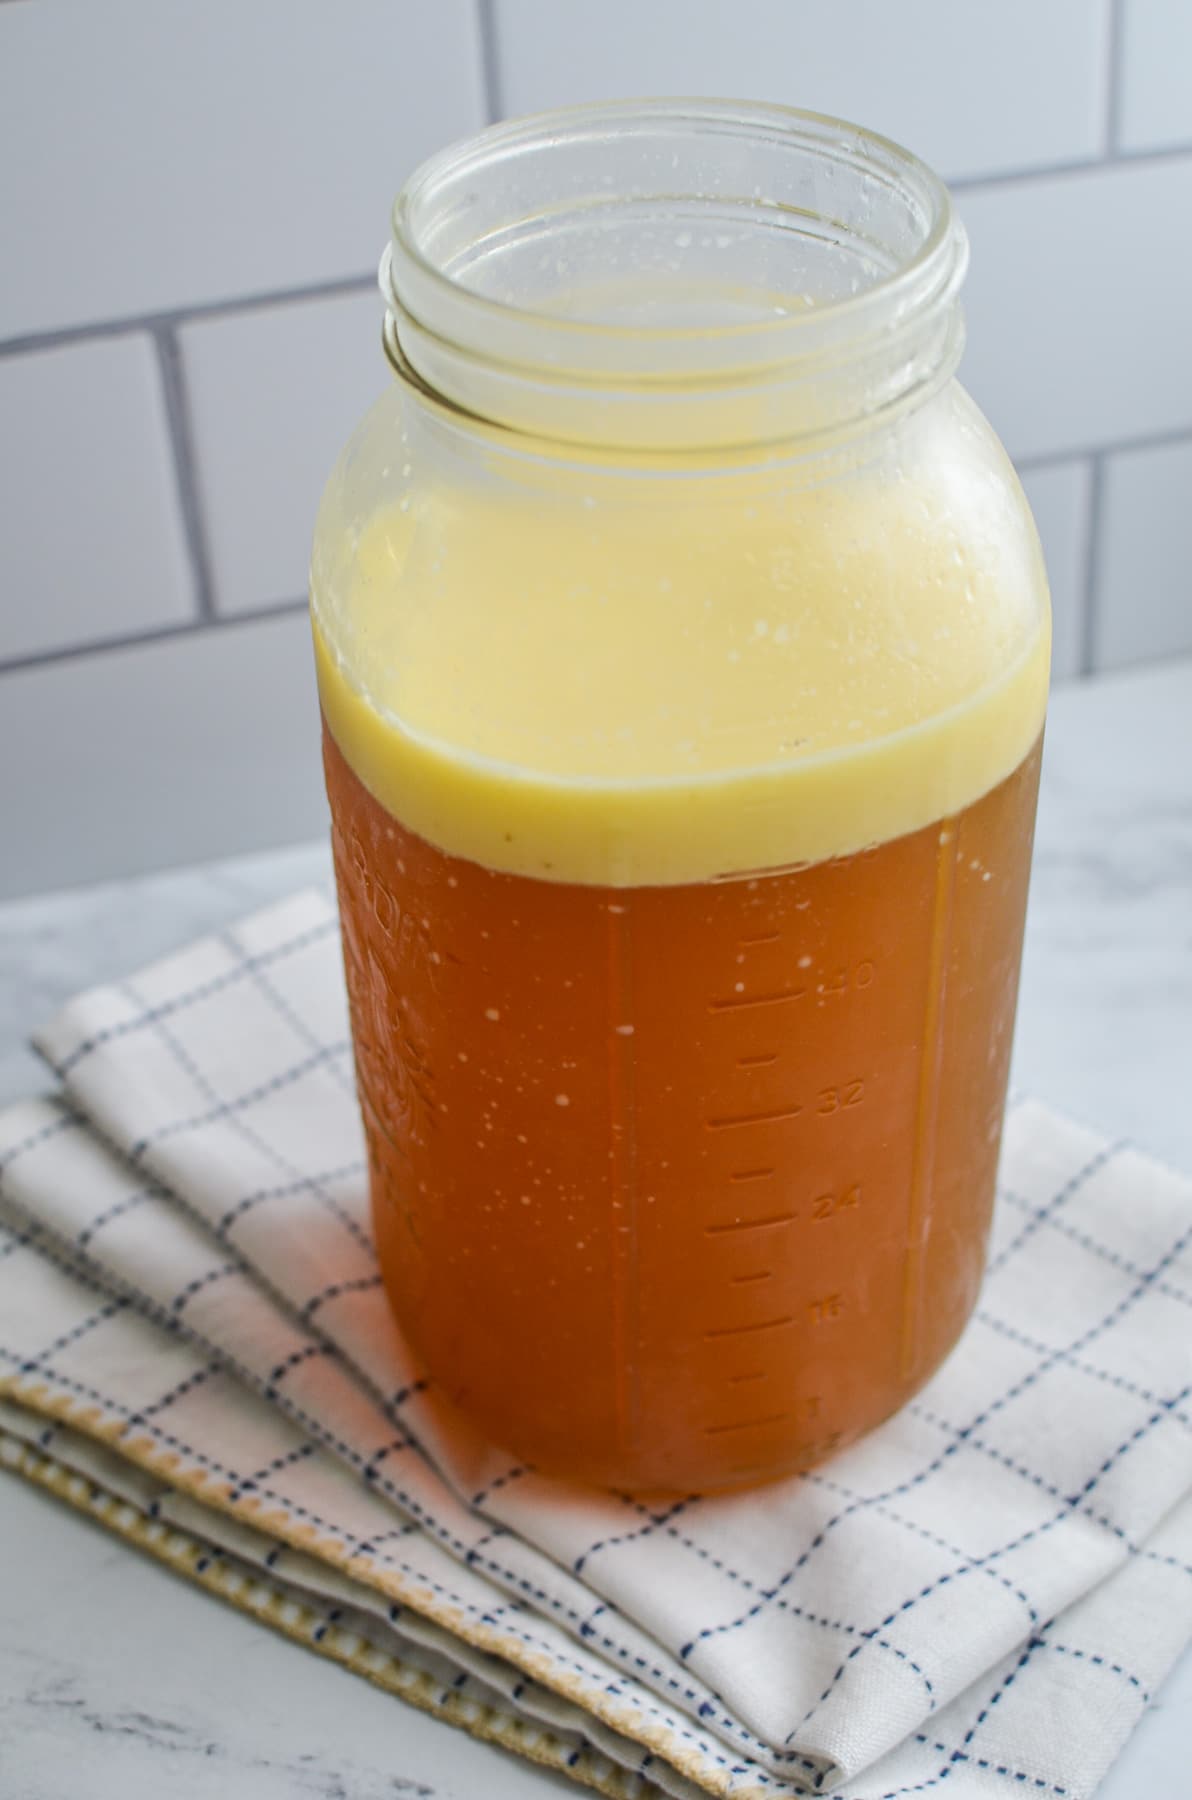 A large jar of bone broth with a fat layer.